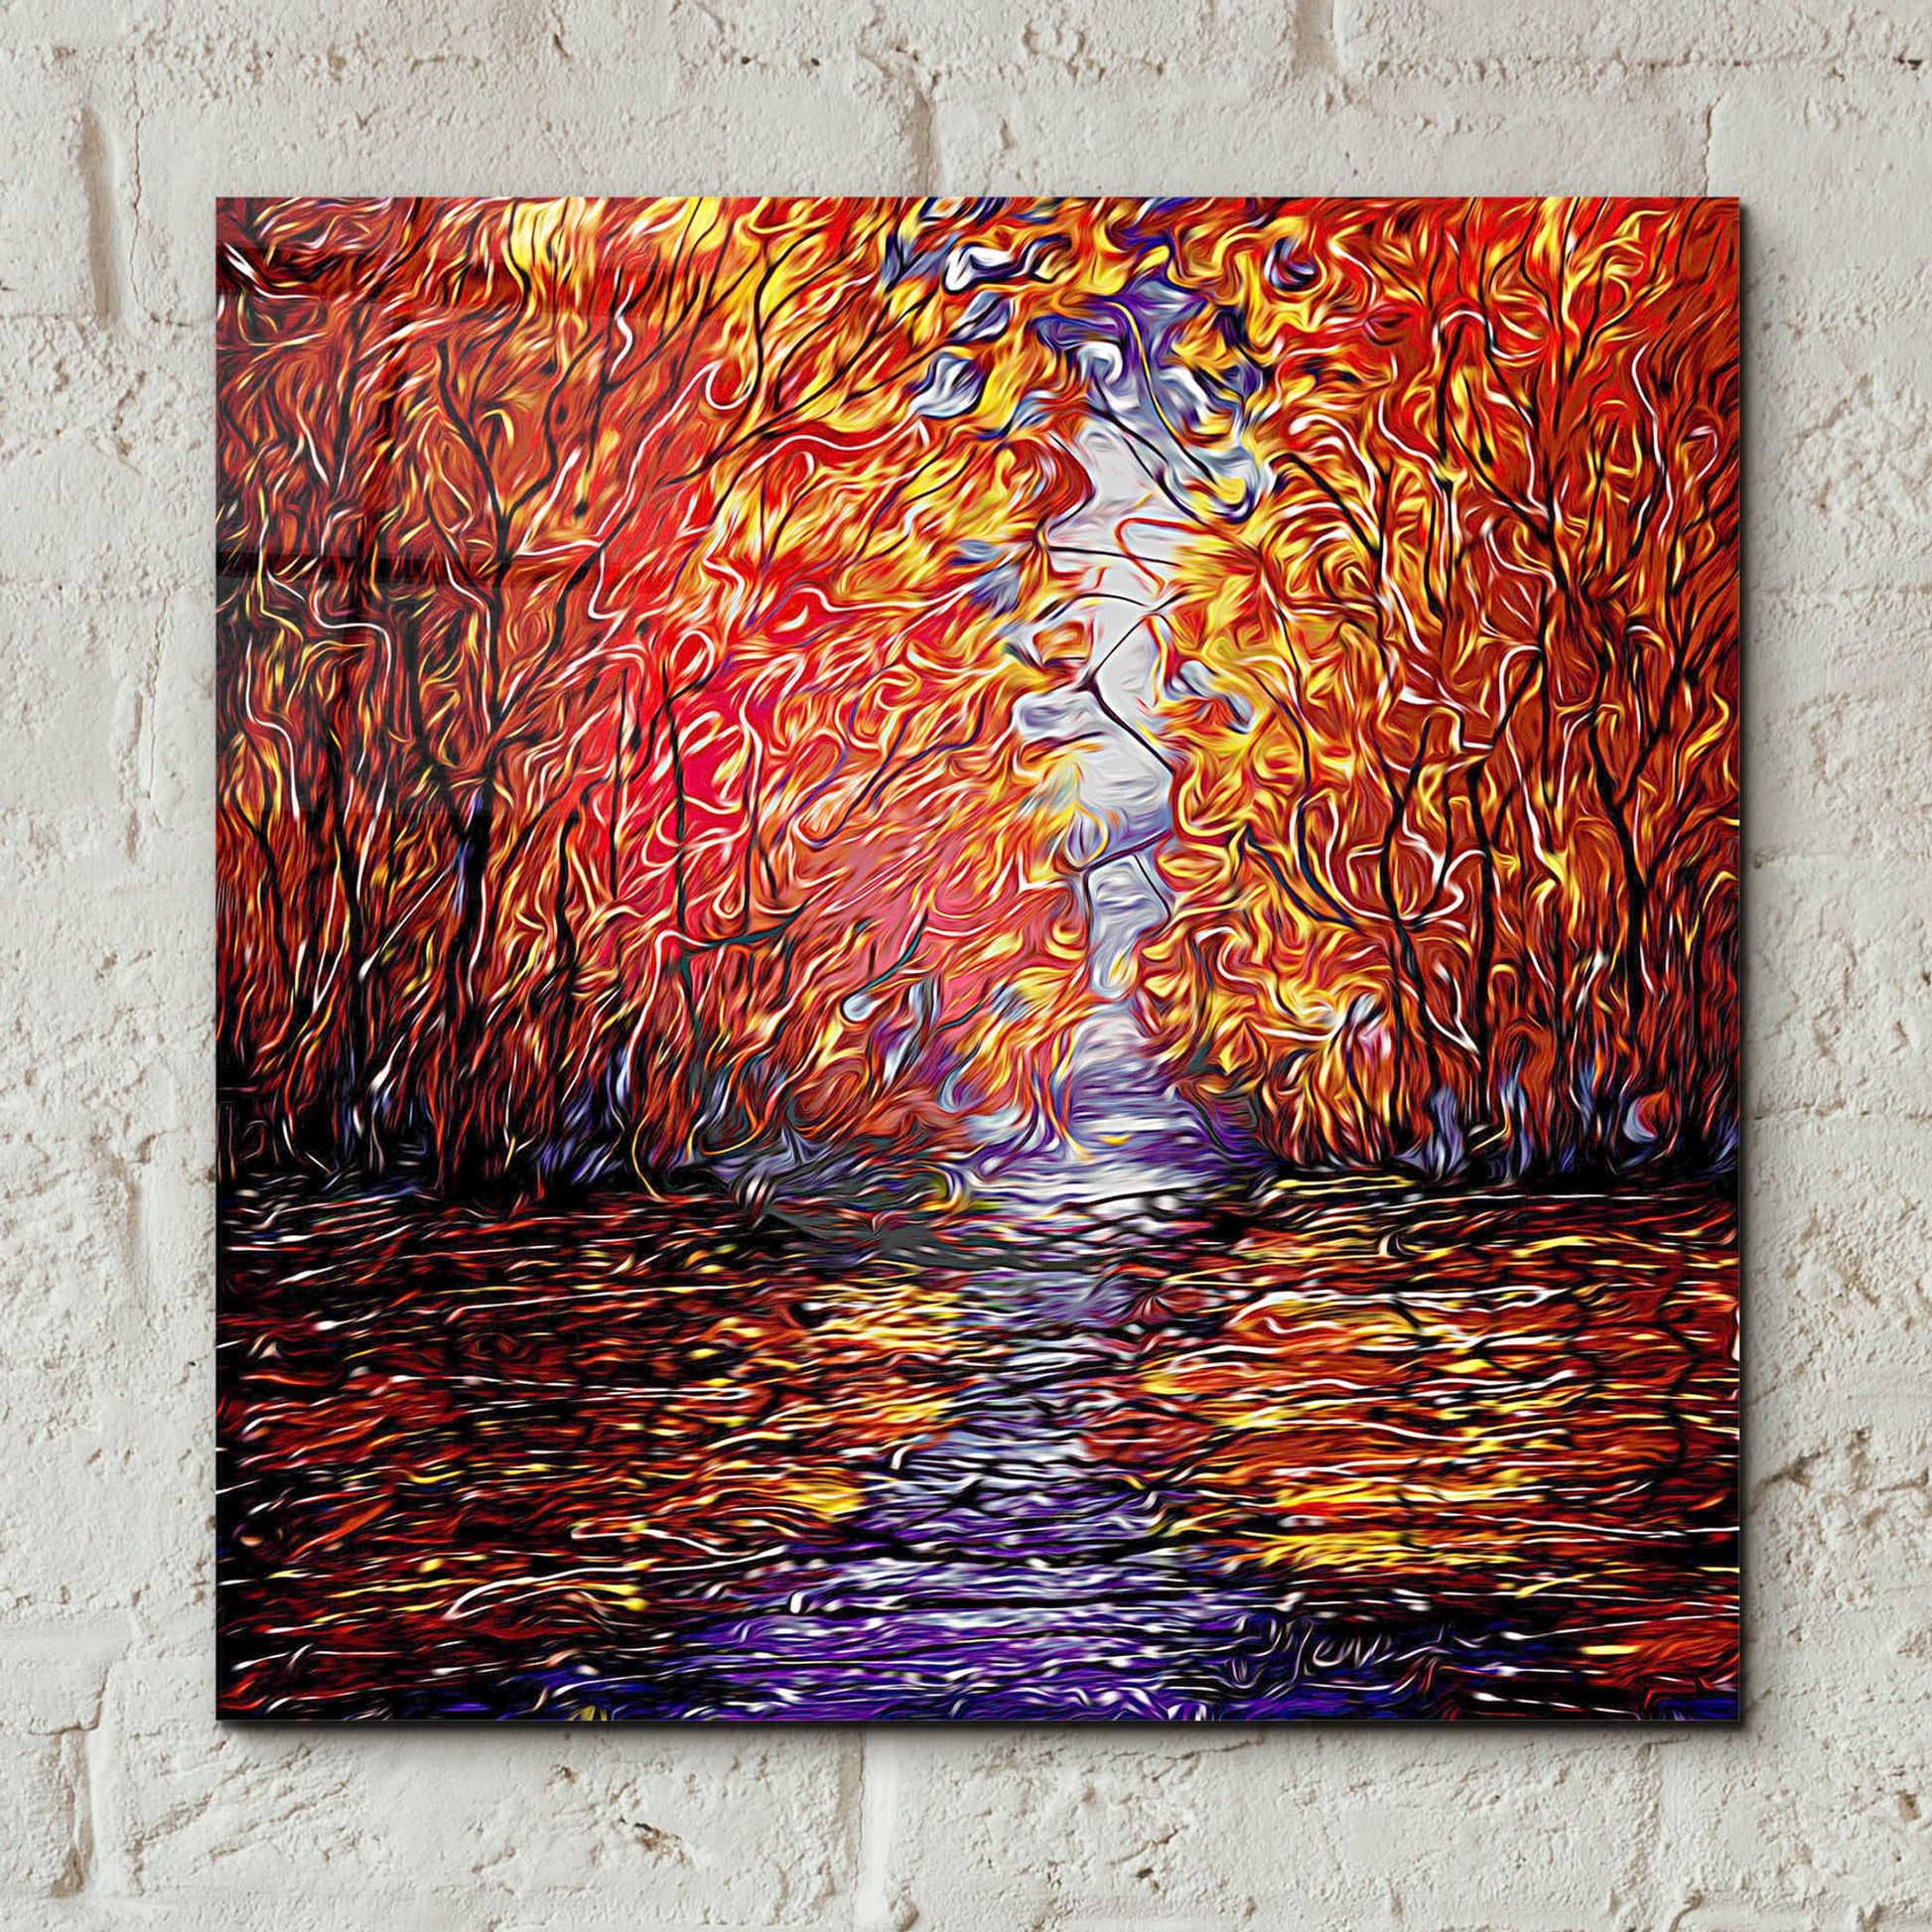 Epic Art 'Red Trees Reflection Abstract' by Lena Owens, Acrylic Glass Wall Art,12x12